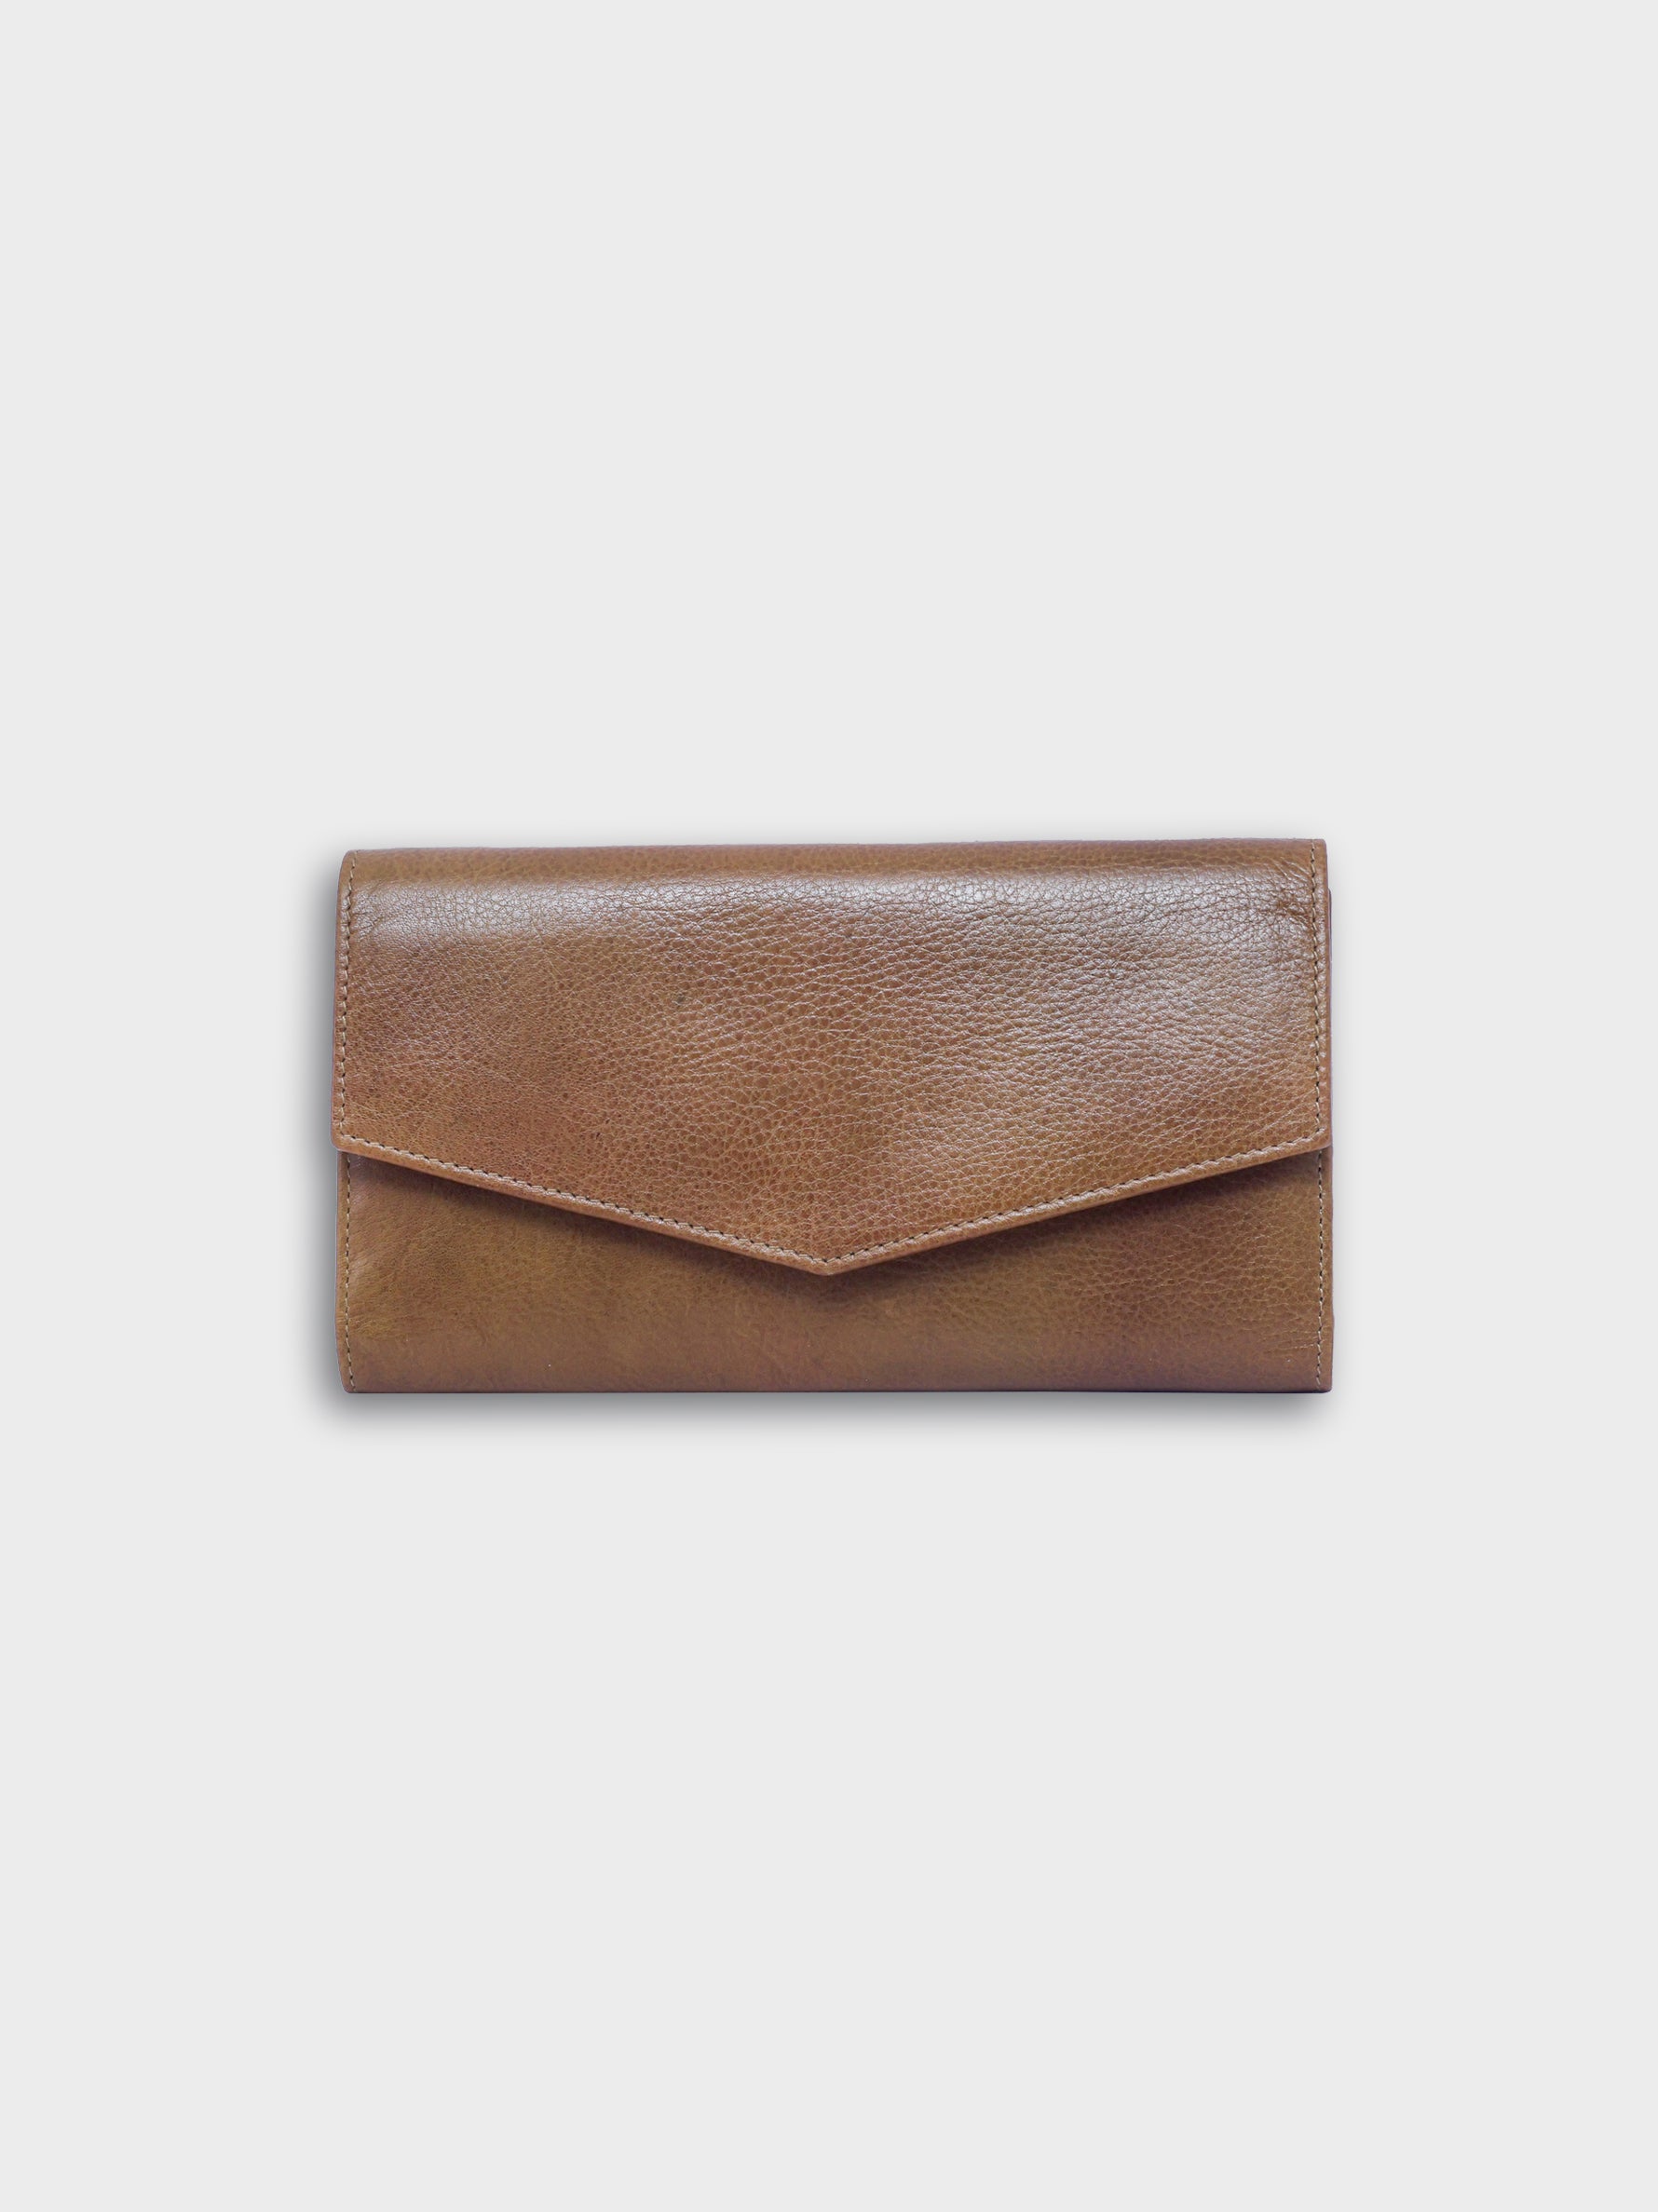 Handcrafted Genuine Vegetable Tanned Leather Envelope Wallet Olive Green for Women Tan & Loom